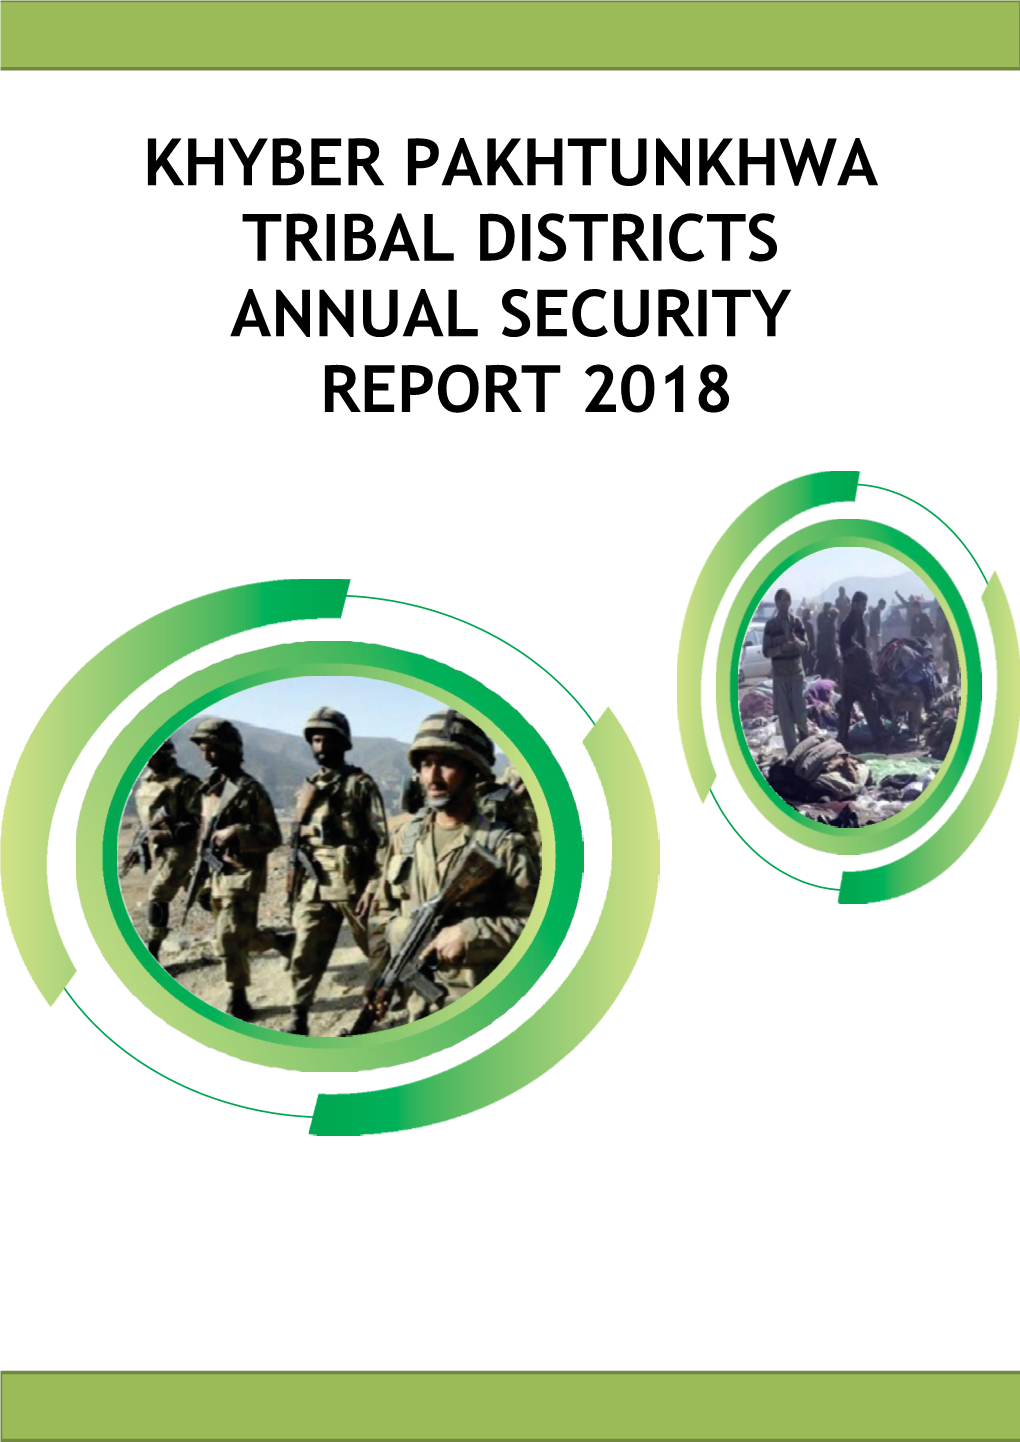 Khyber Pakhtunkhwa Tribal Districts Annual Security Report 2018